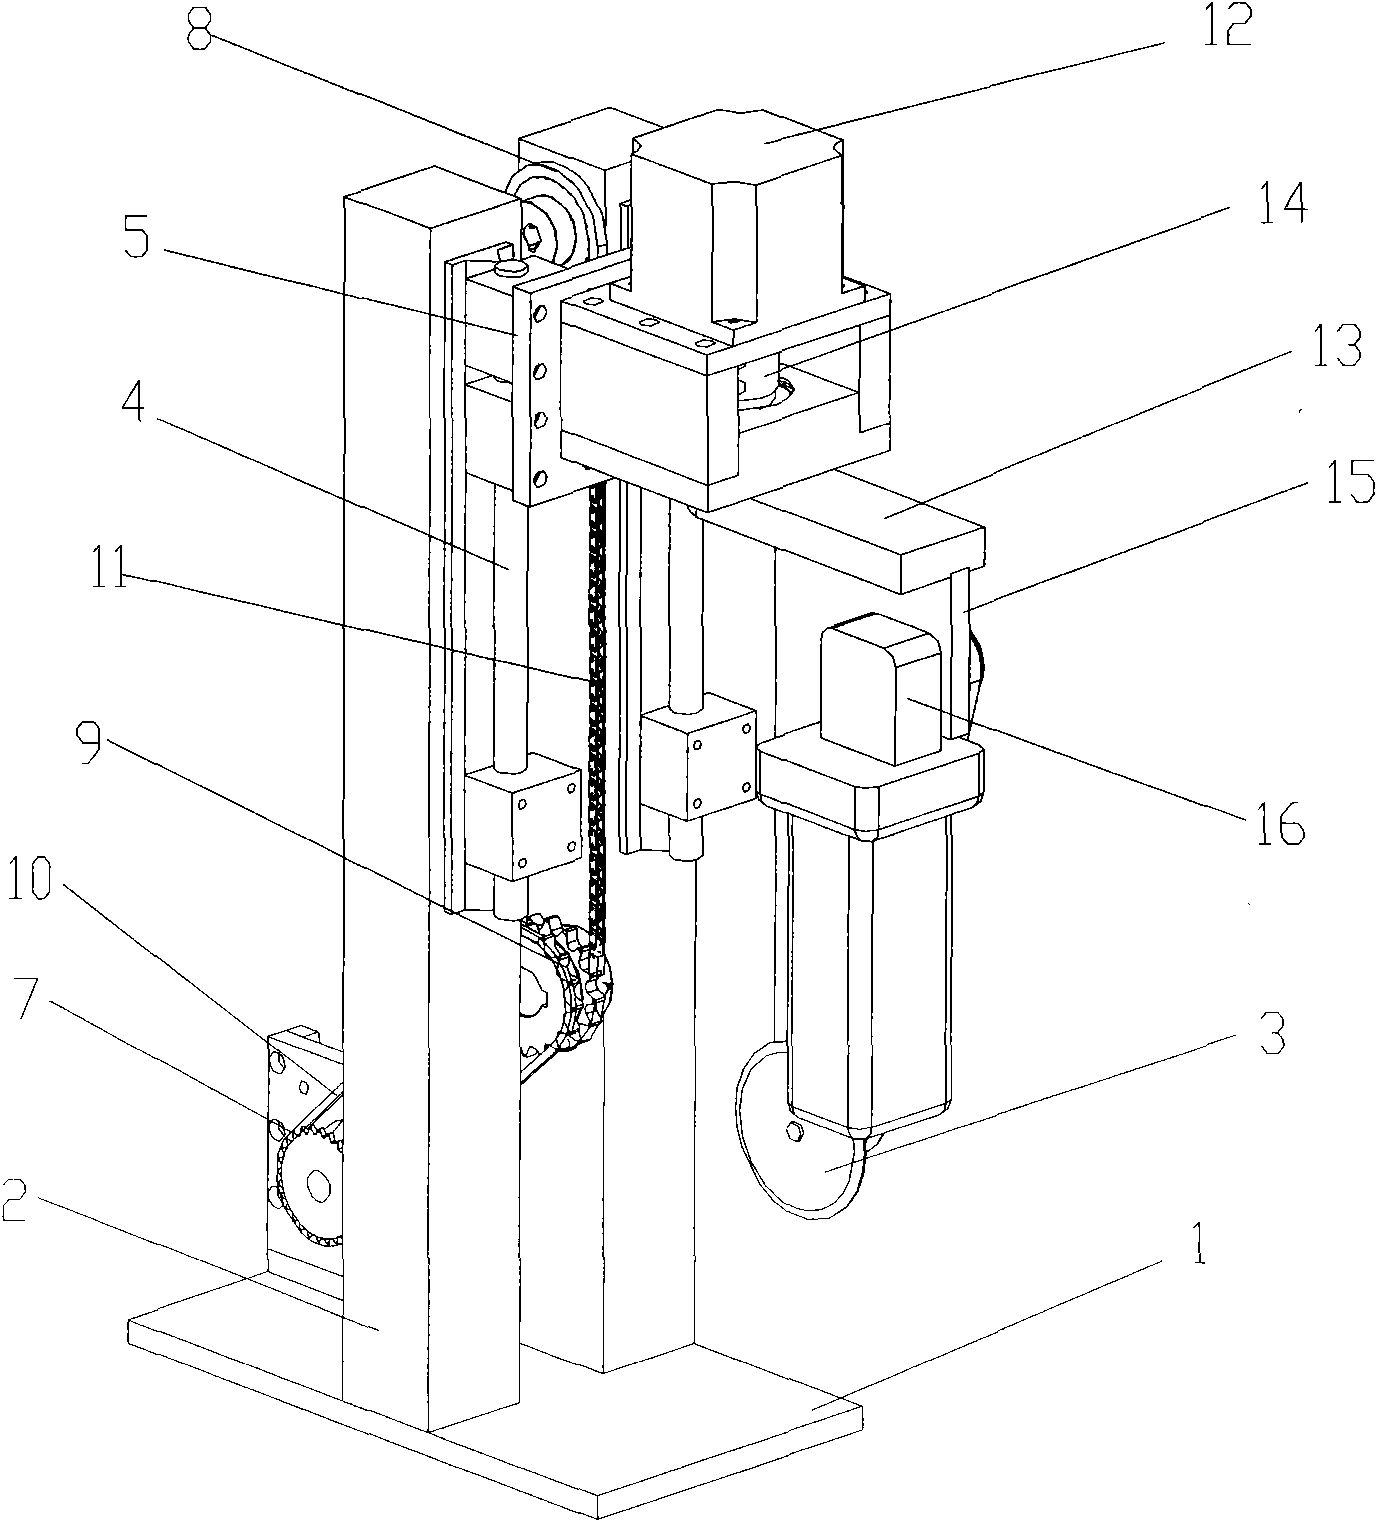 Automatic grooving device for numeric control bender